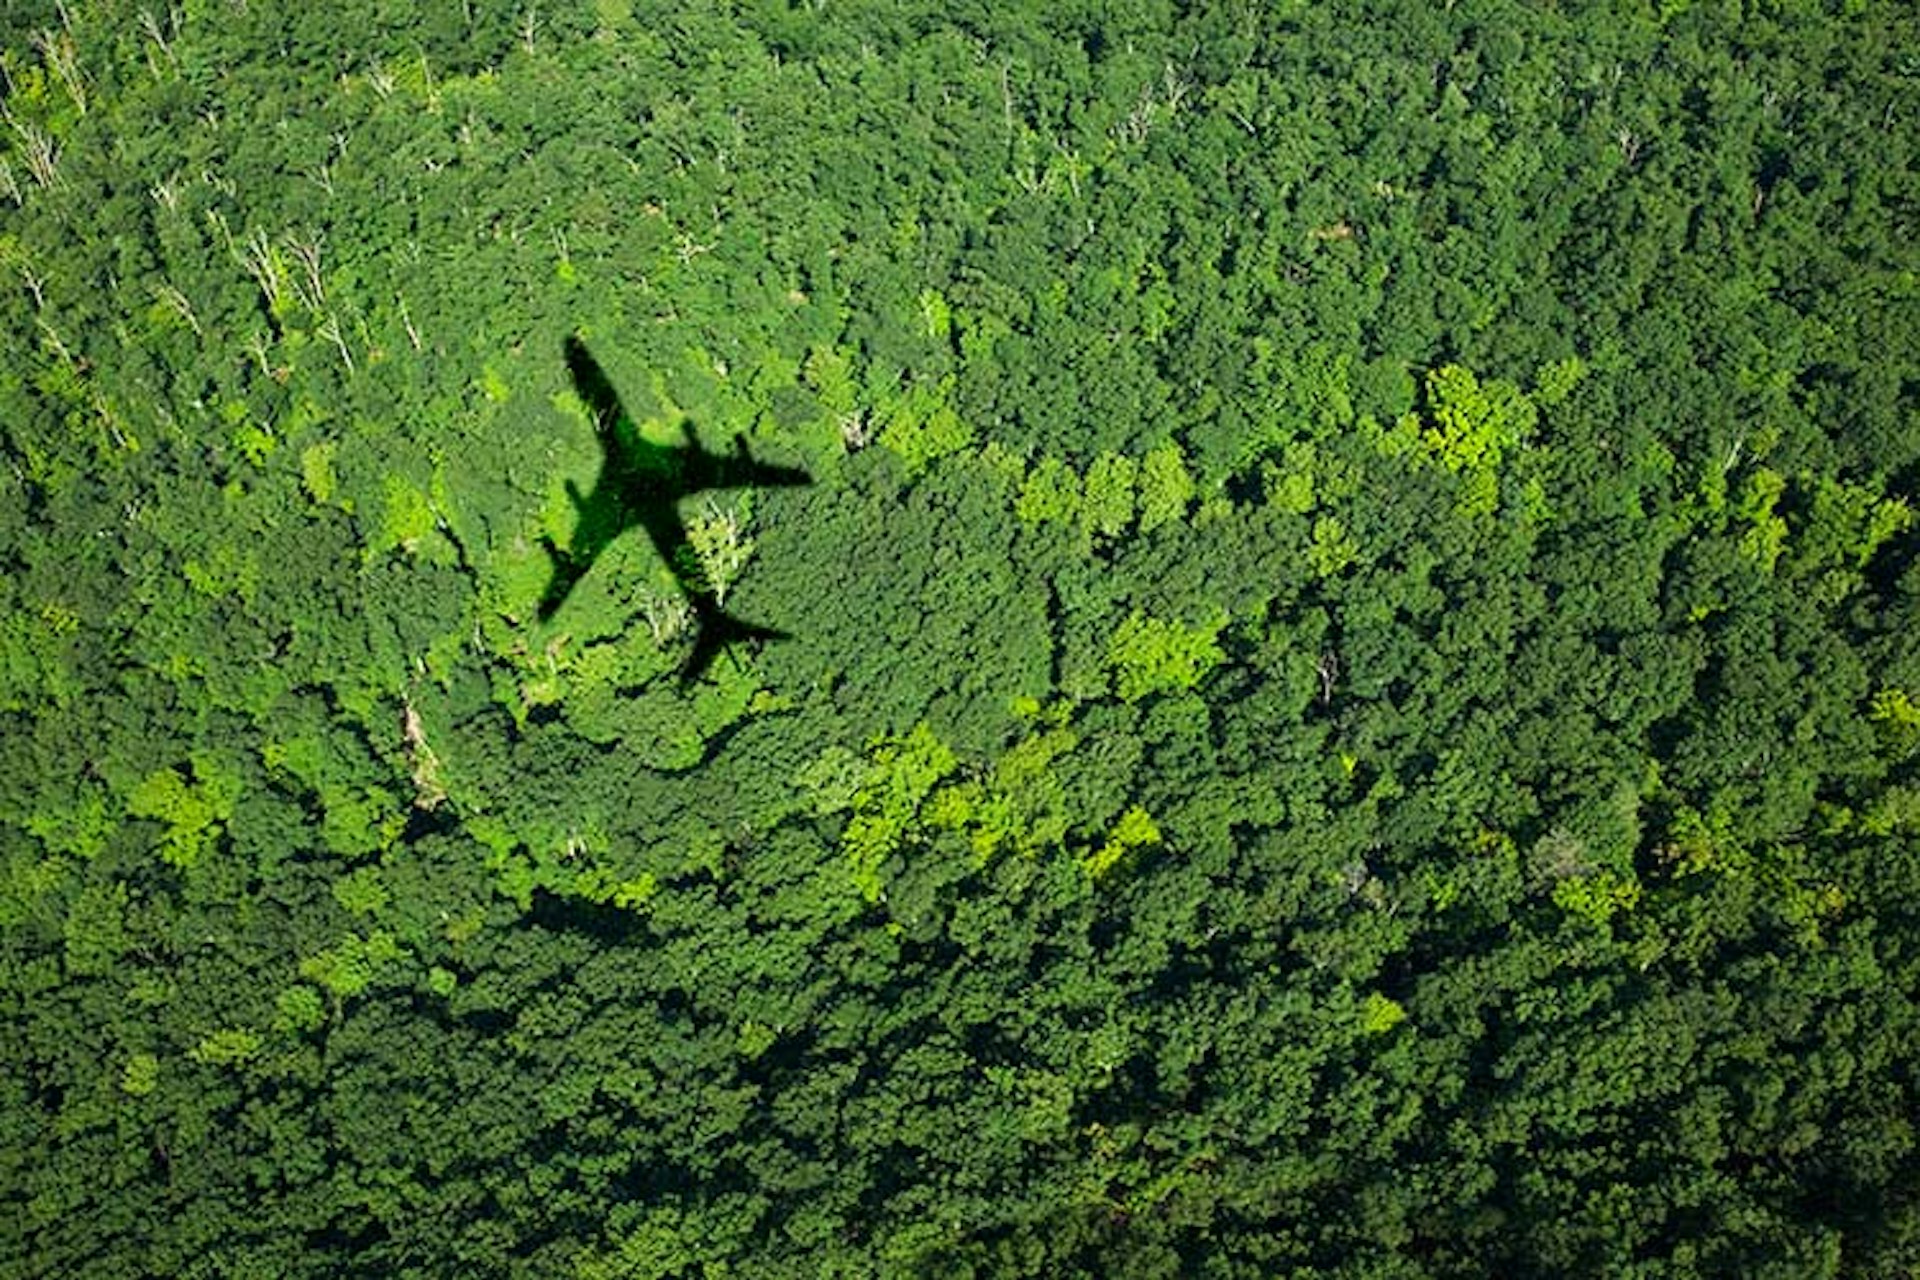 Carbon offset programs can help fund reforestation. Image by homas Jackson / Stone / Getty Images